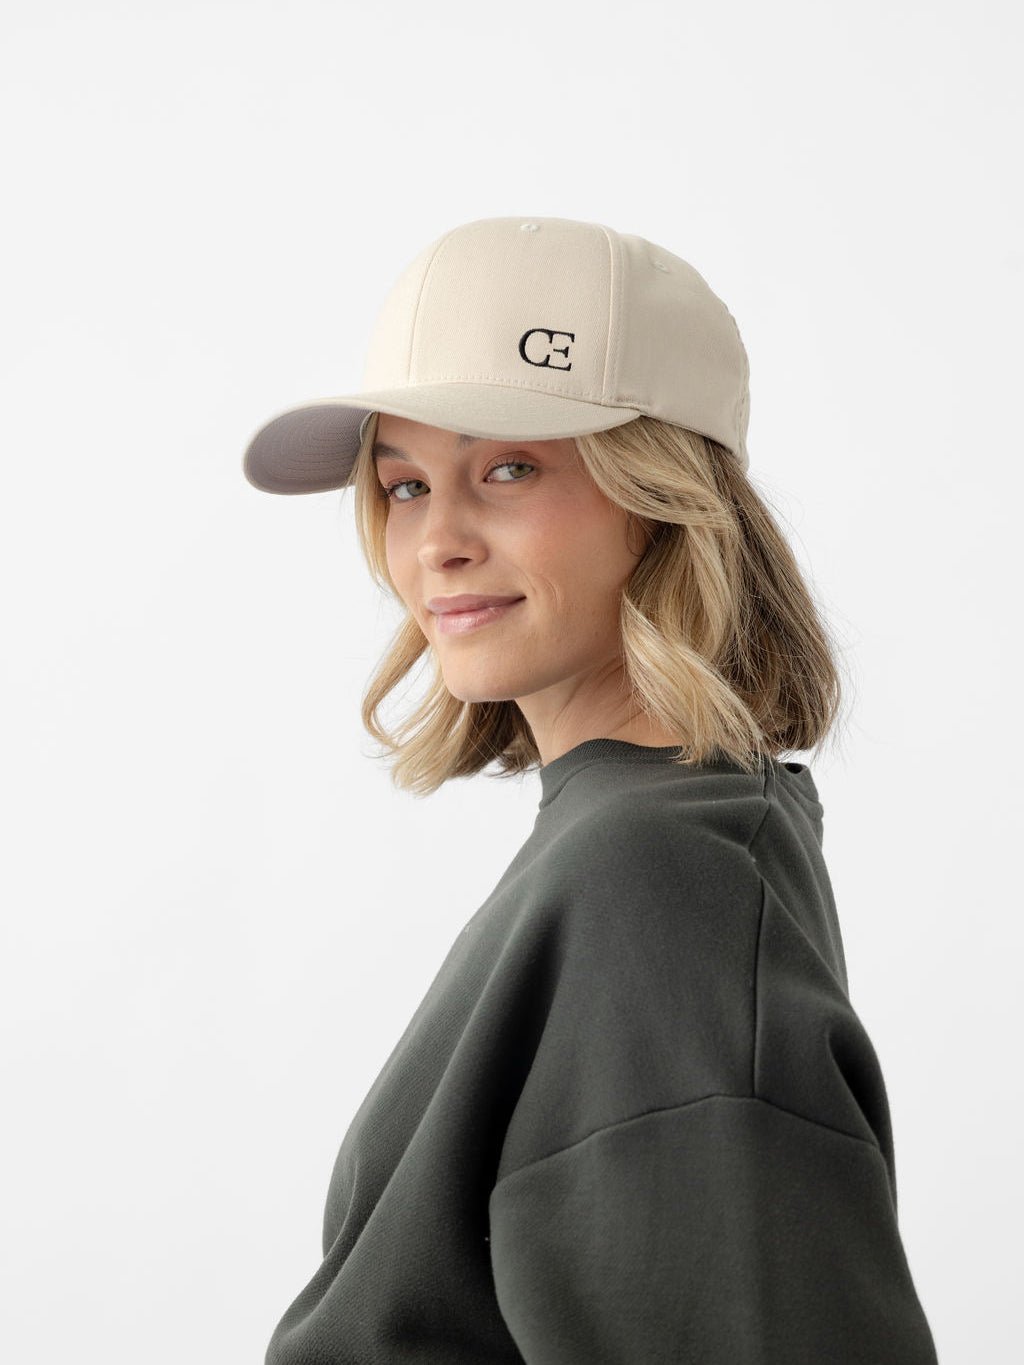 Woman with stone urban classic hat looking at camera 